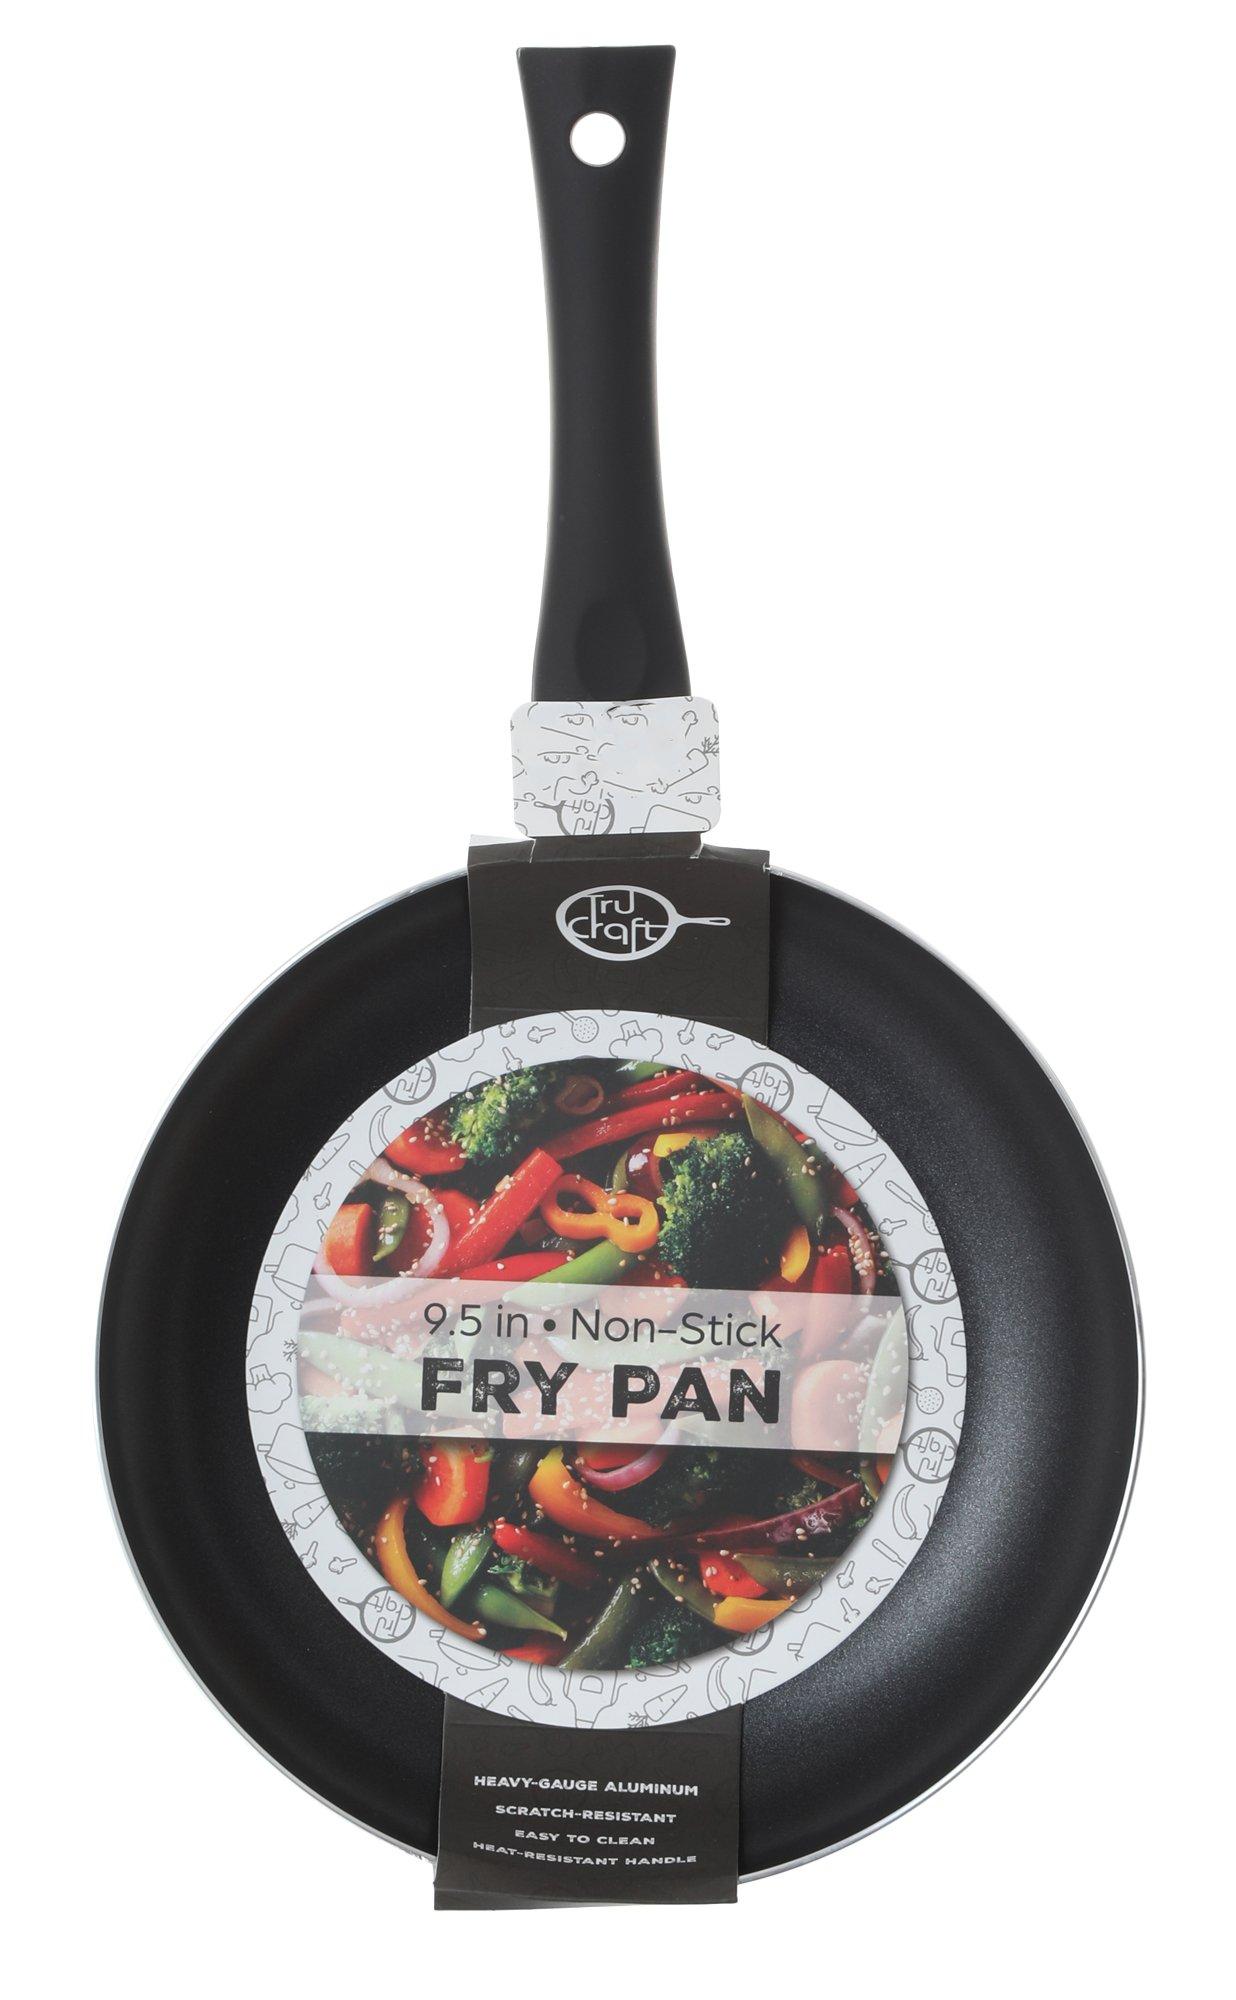 9.5 in. Non-Stick Fry Pan